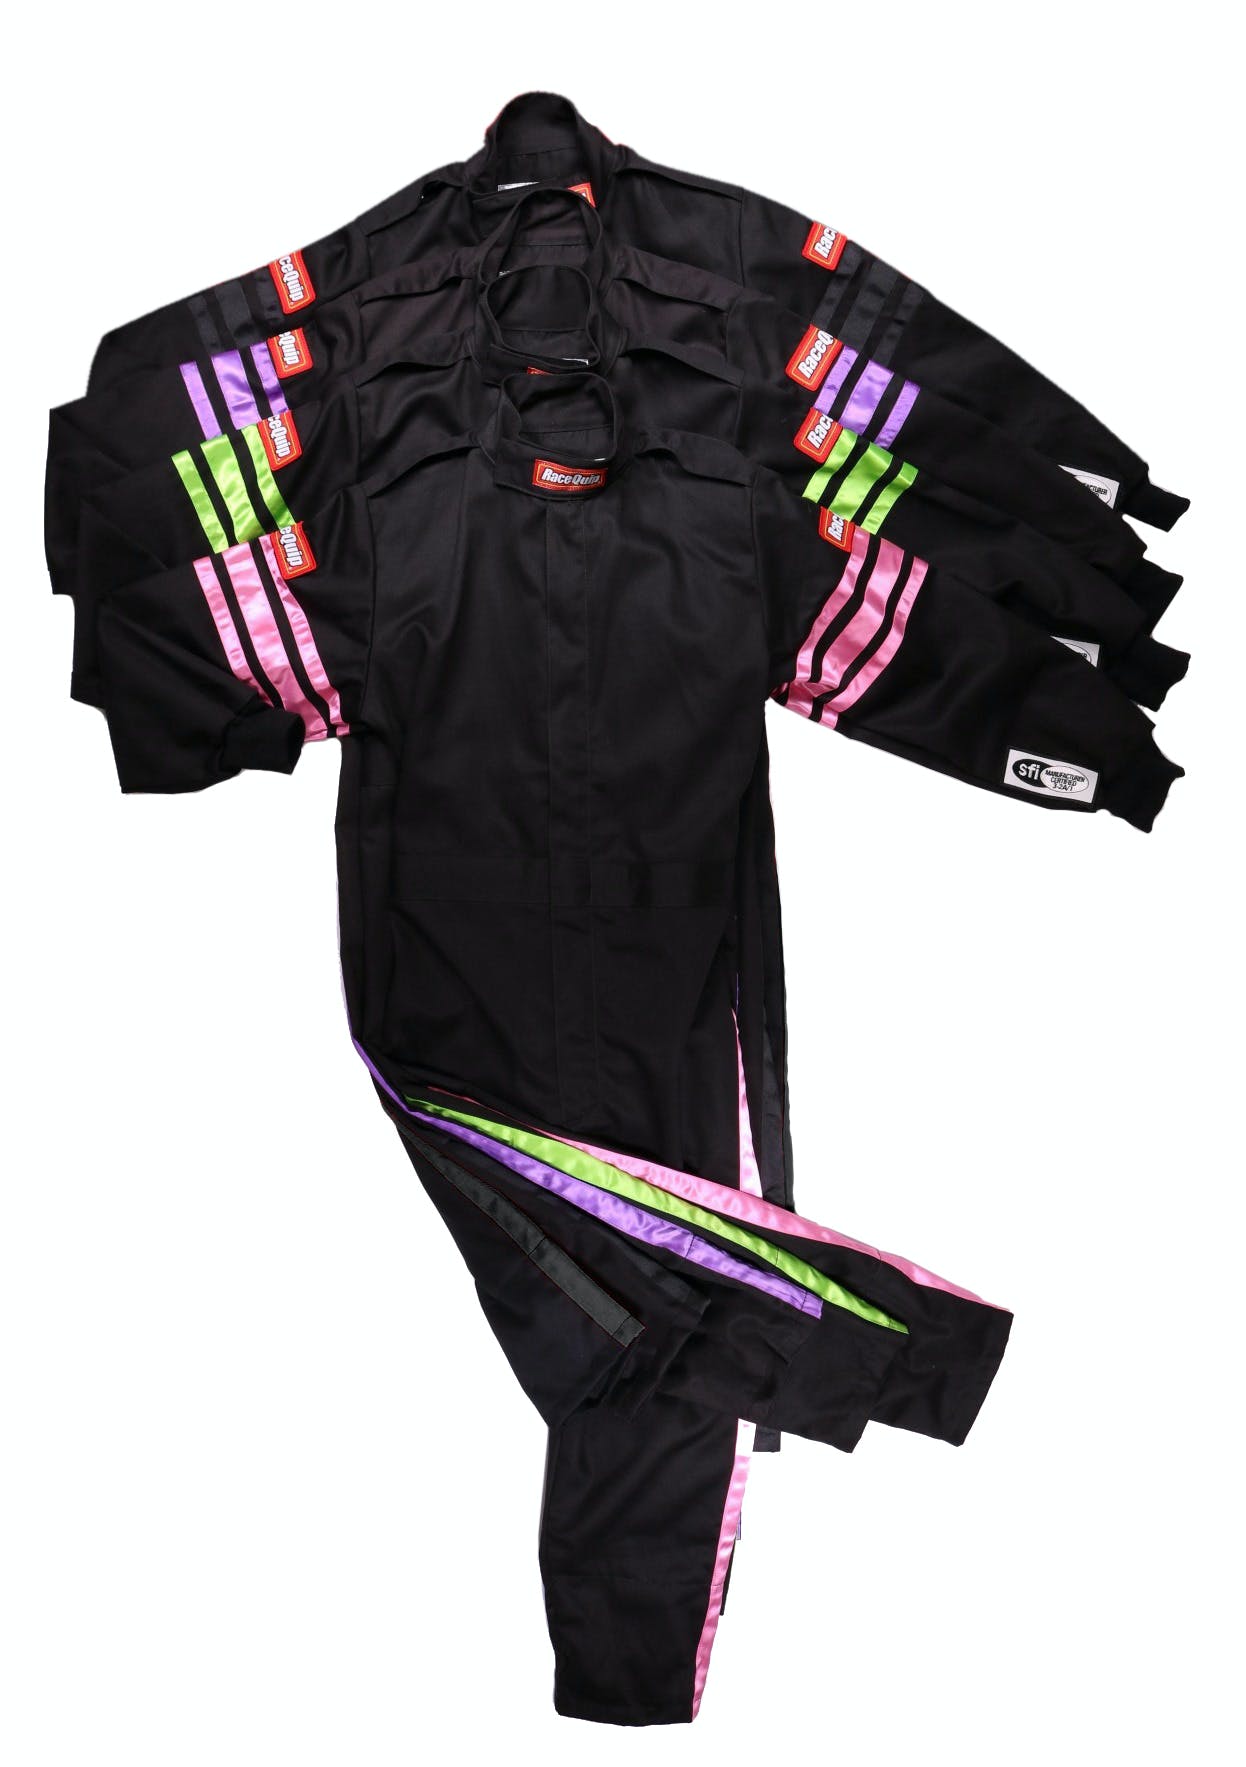 RaceQuip 1950796 SFI-1 Pyrovatex One-Piece Single-Layer Youth Racing Fire Suit (Black/Green-XL)